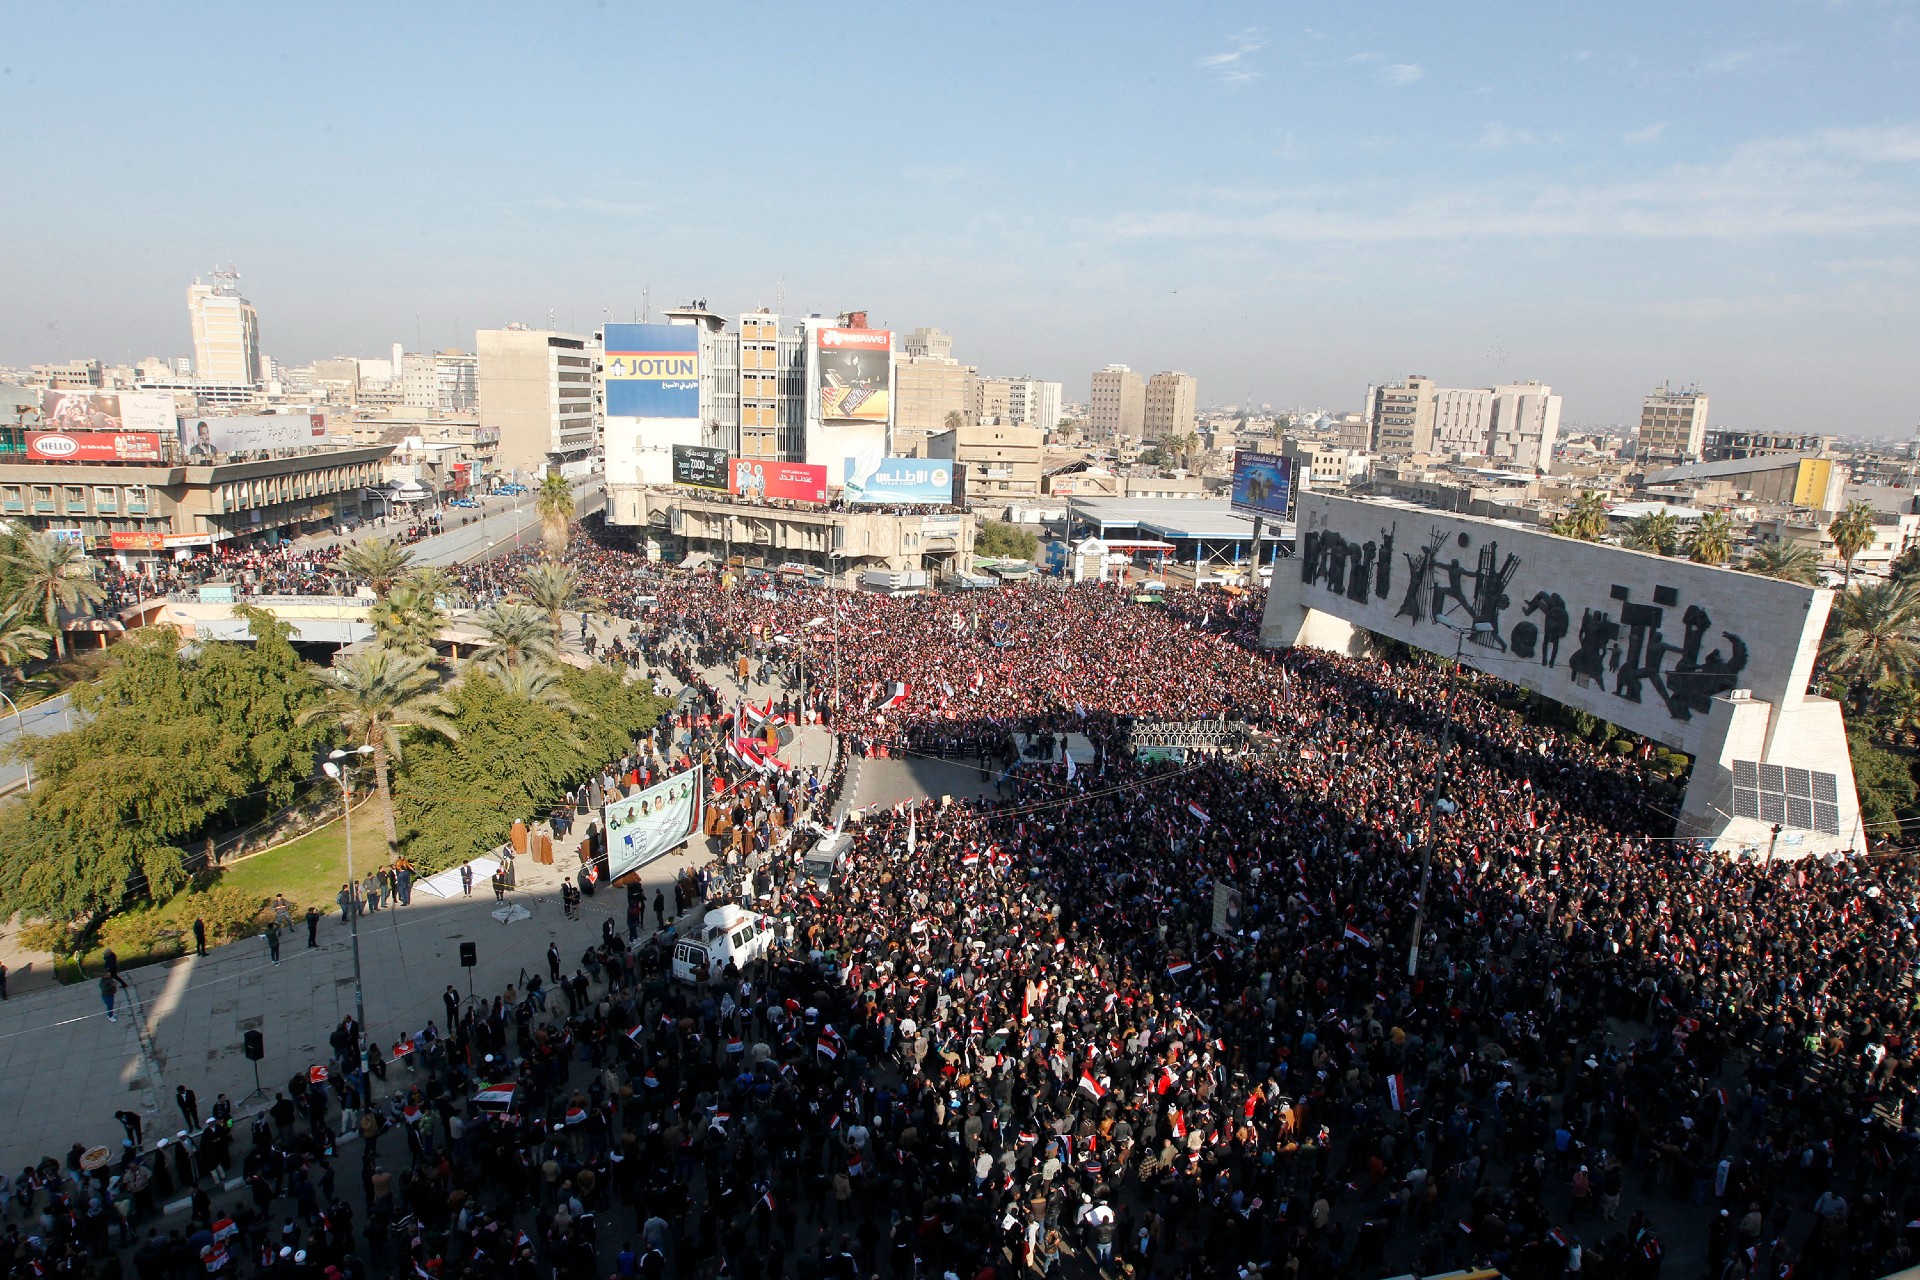 Supporters of the Sadrist movement at a demonstration in Baghdad's Tahrir Square on 11 February, 2017 (AFP)